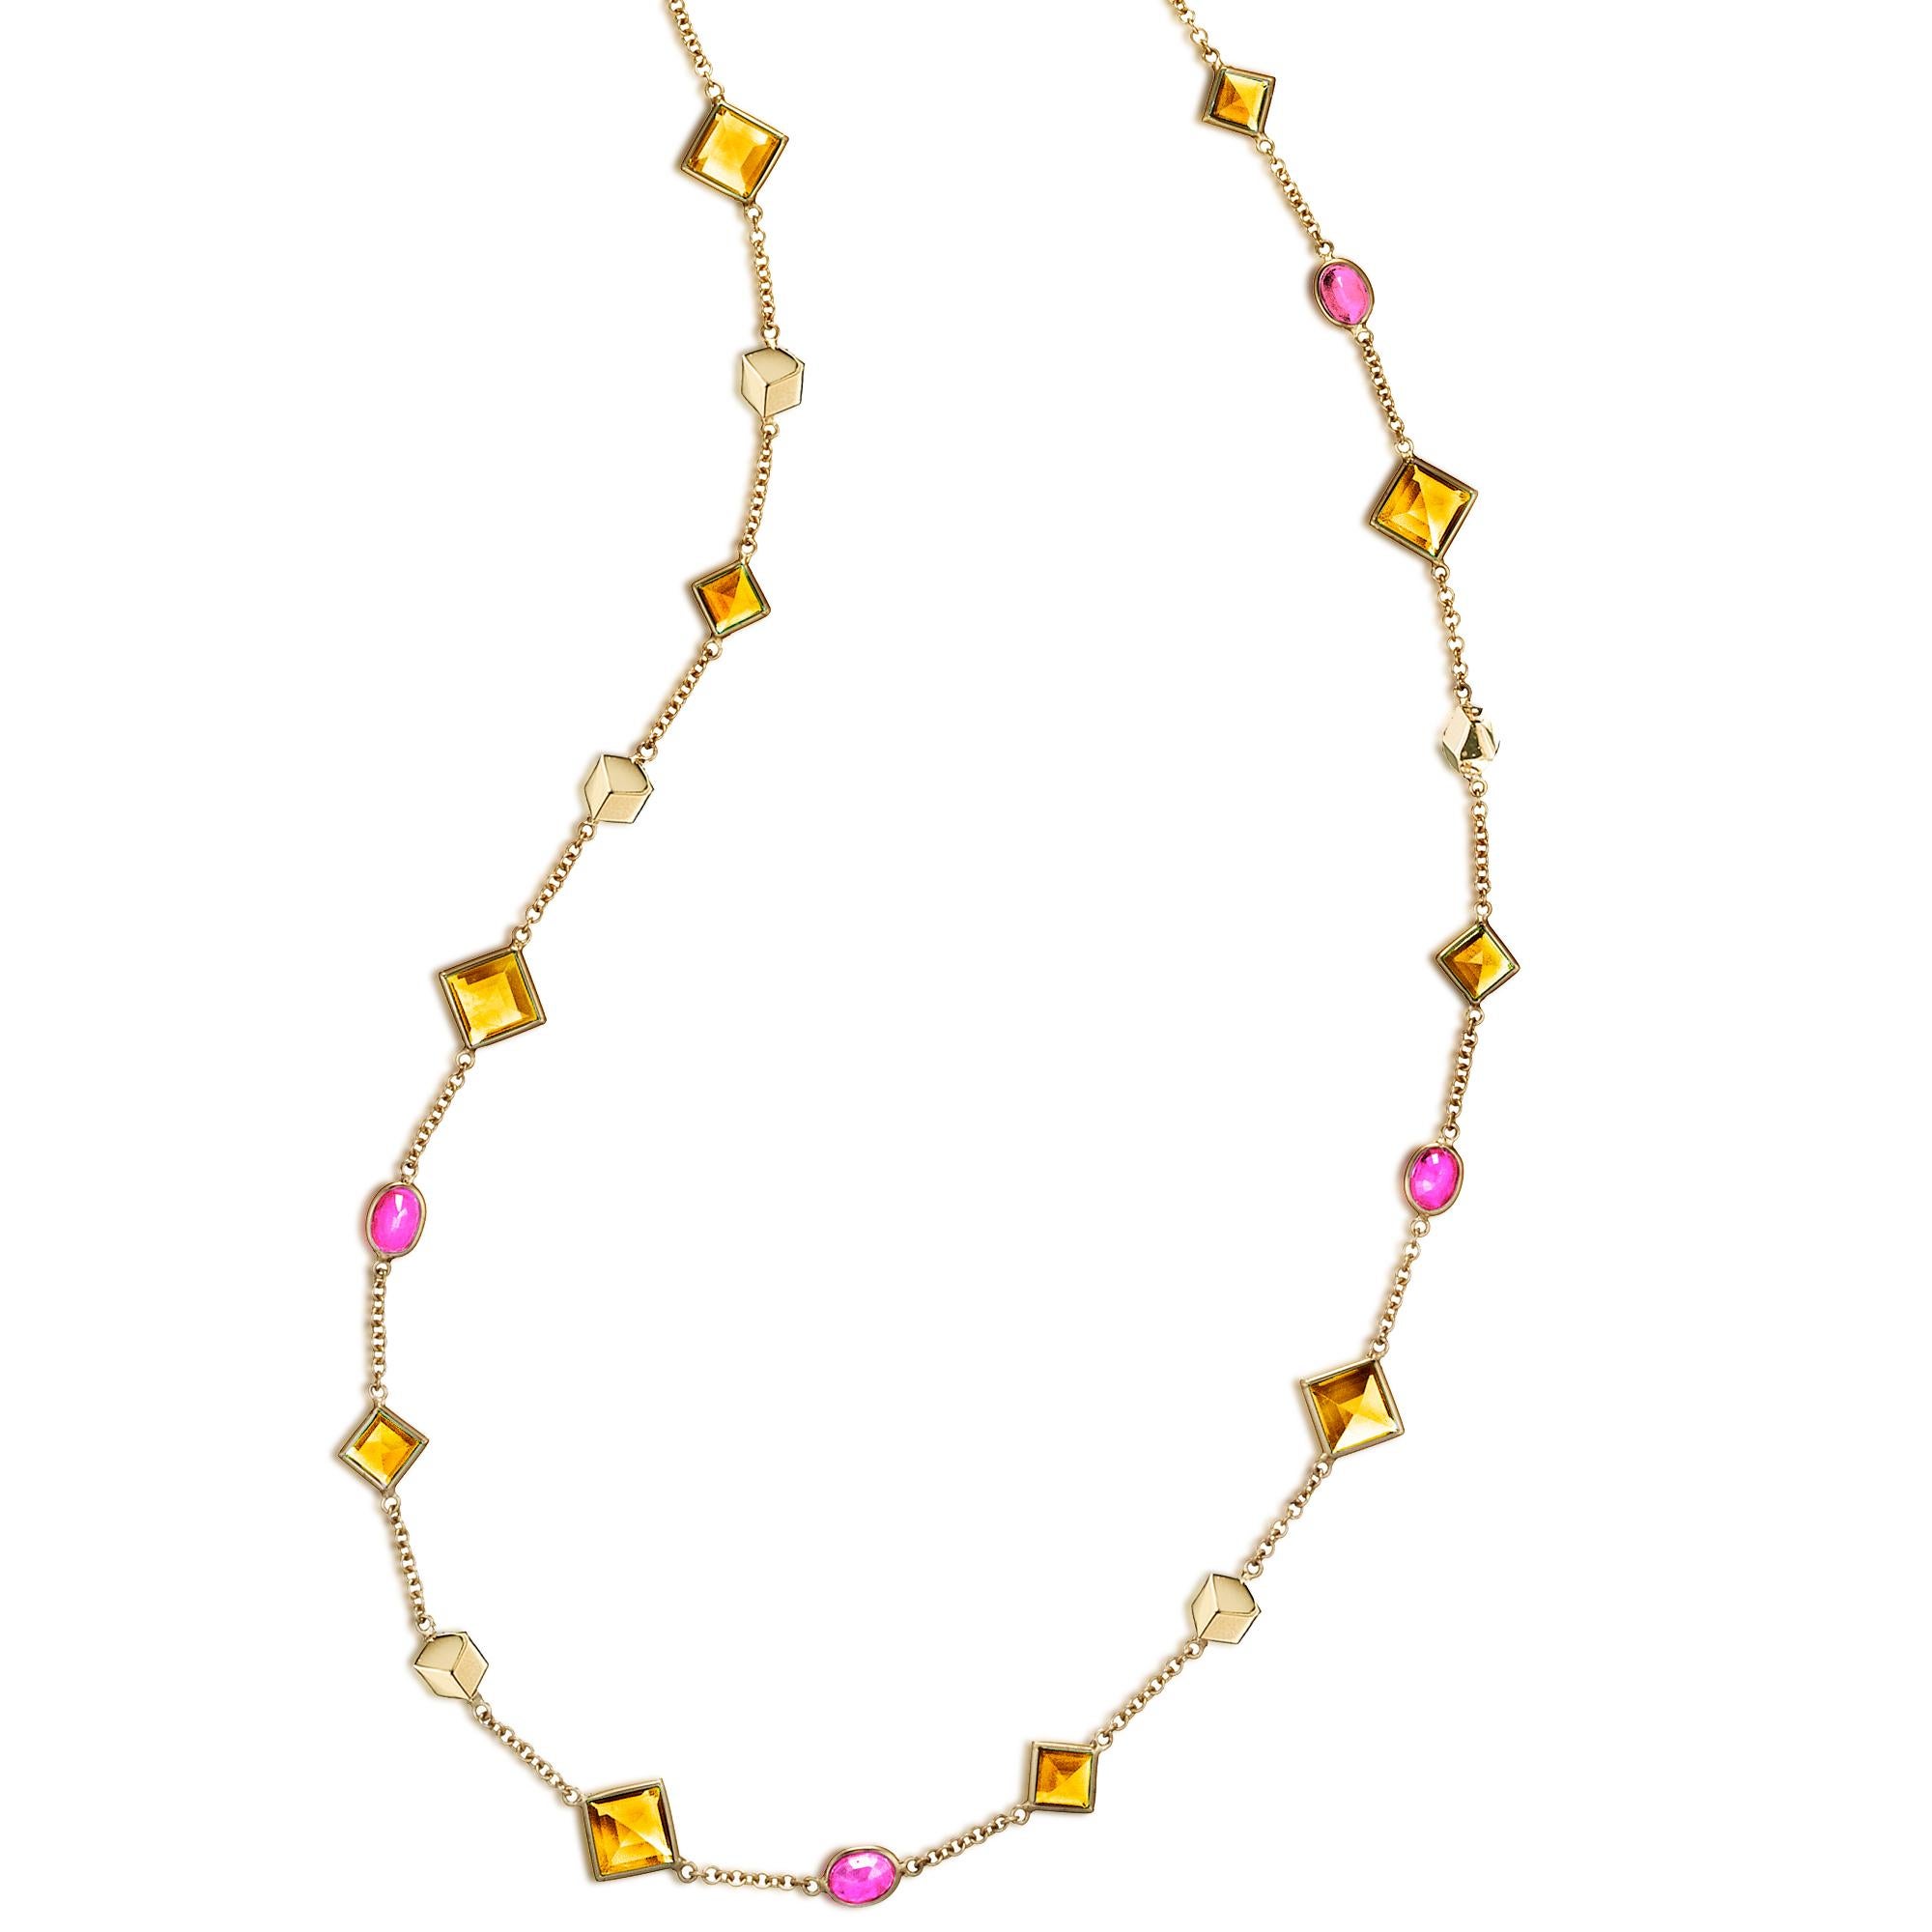 18kt yellow gold Florentine sautoir necklace with bezel set emerald-cut citrine and oval pink sapphires, and signature Brillante® motif.

Inspired by the Garden of the Iris, the Florentine collection pairs bold color combinations of geometric